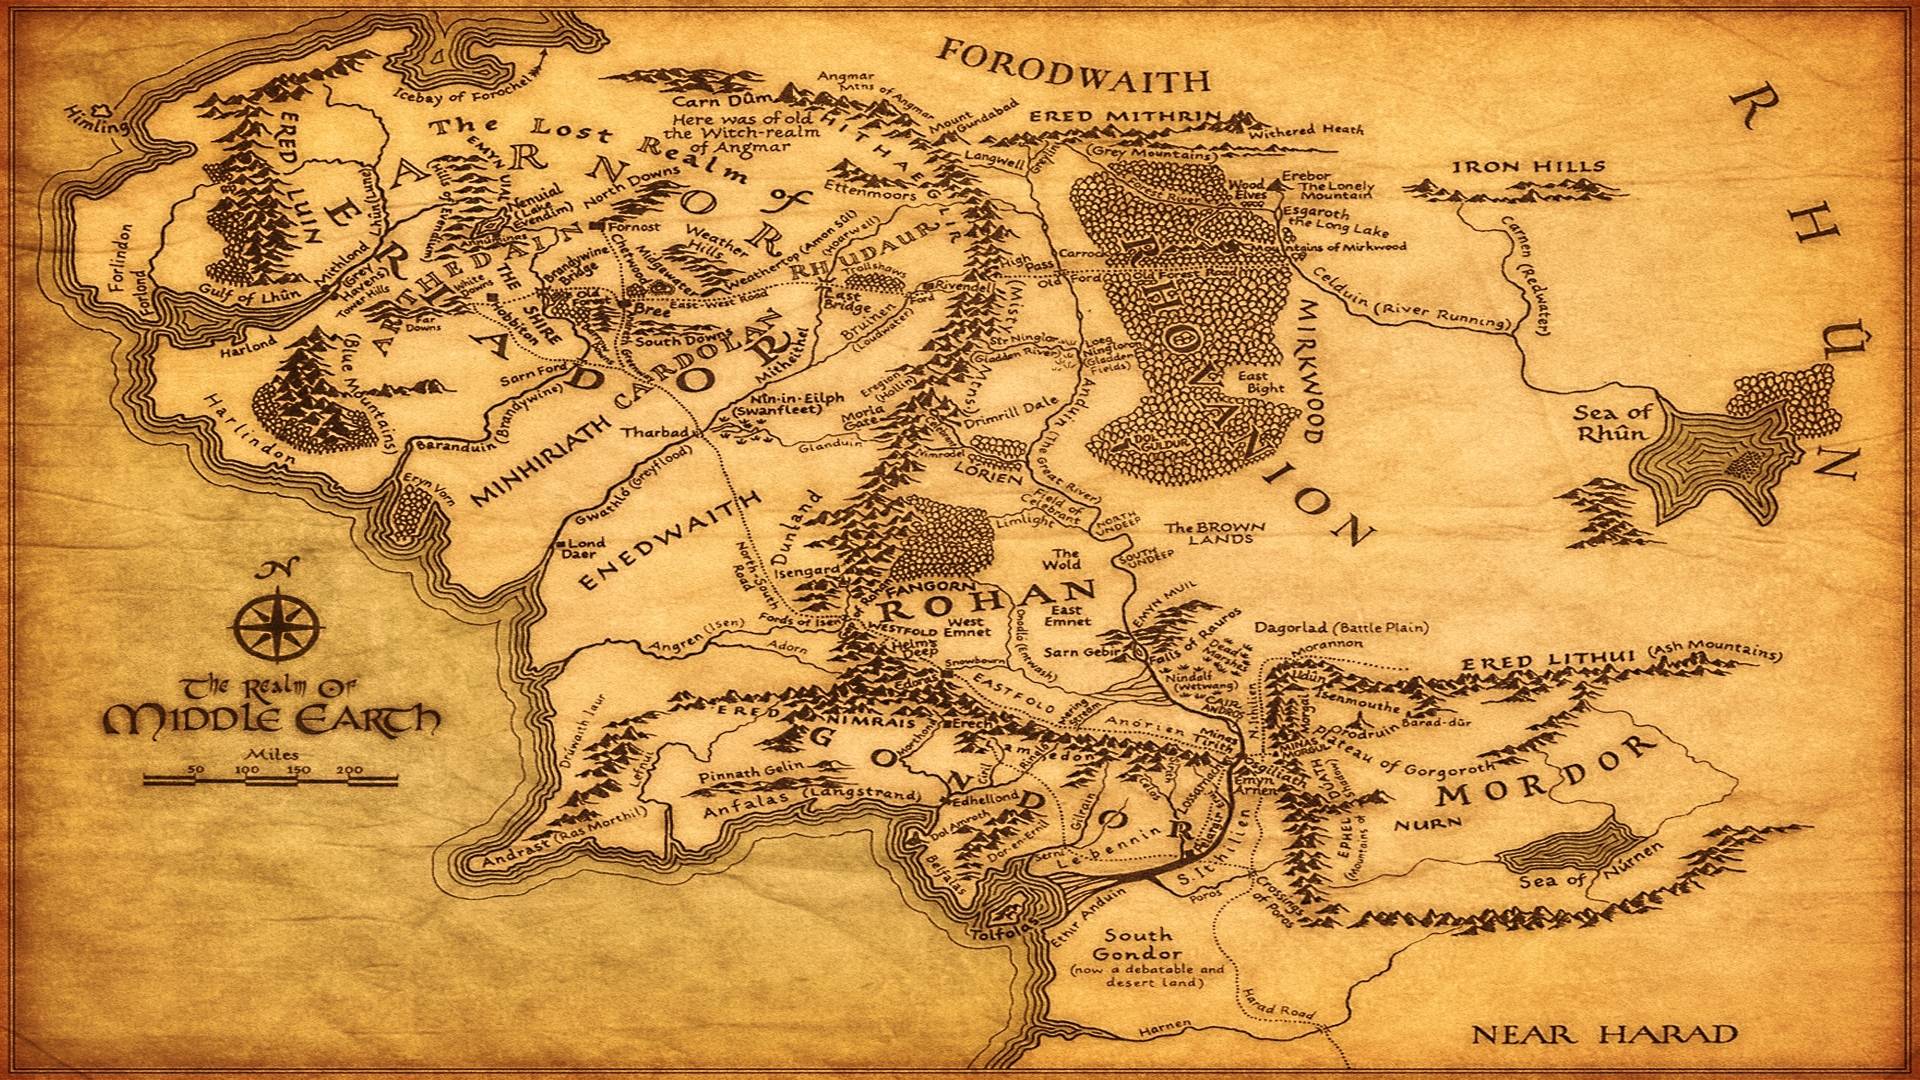 Middle Earth Map Images Hd Wallpapers 1680x1050PX Wallpaper 1920x1080